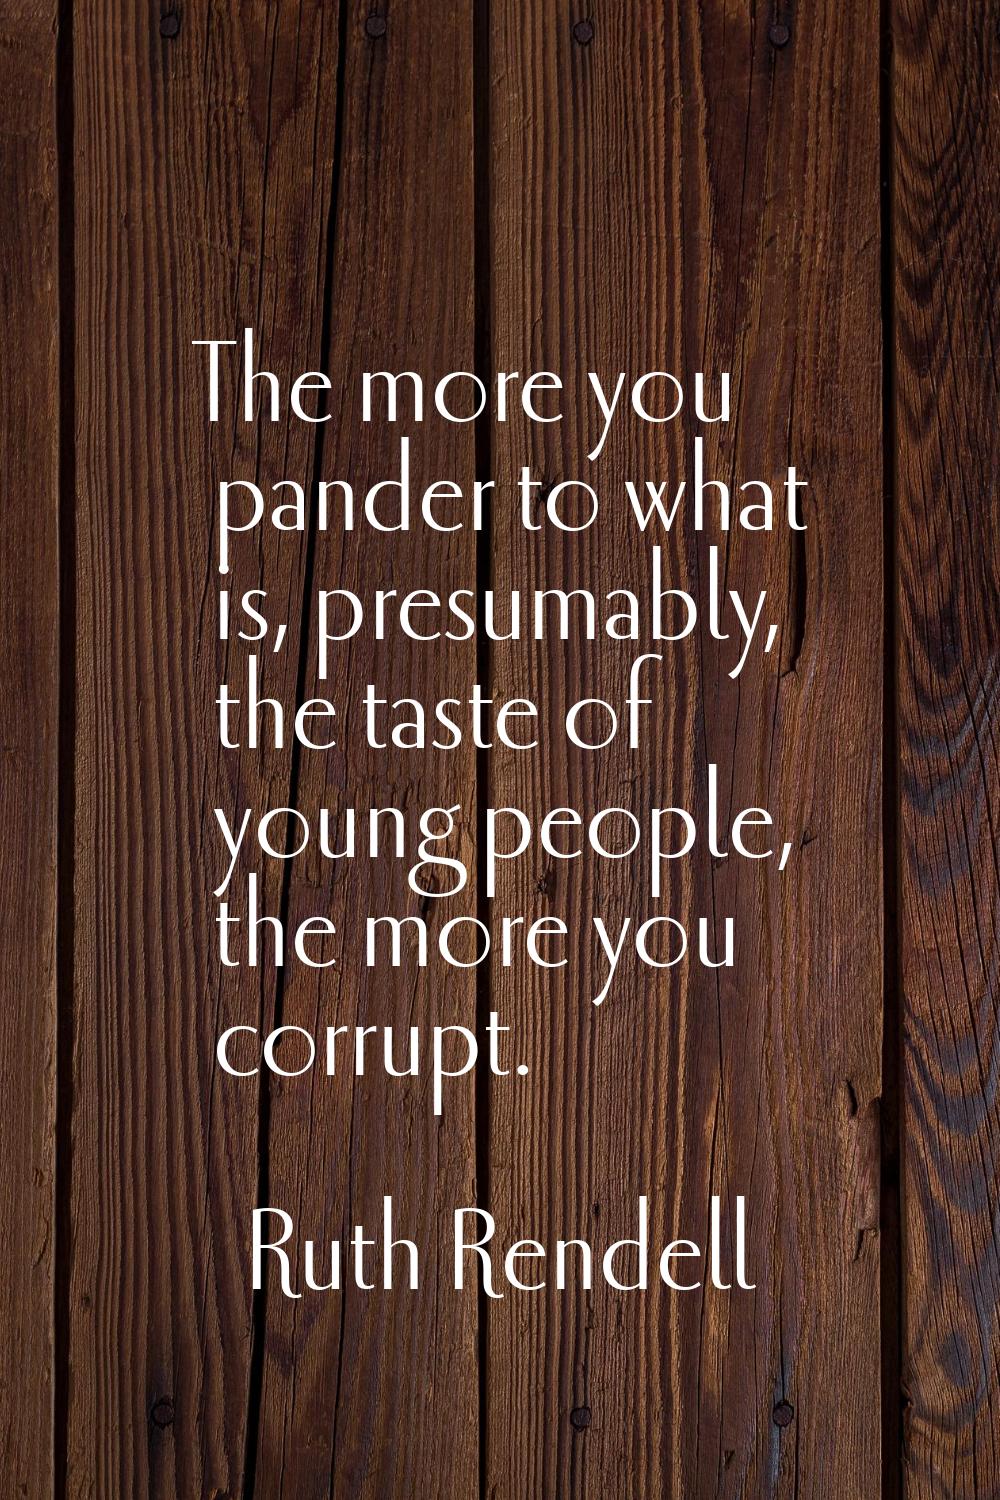 The more you pander to what is, presumably, the taste of young people, the more you corrupt.